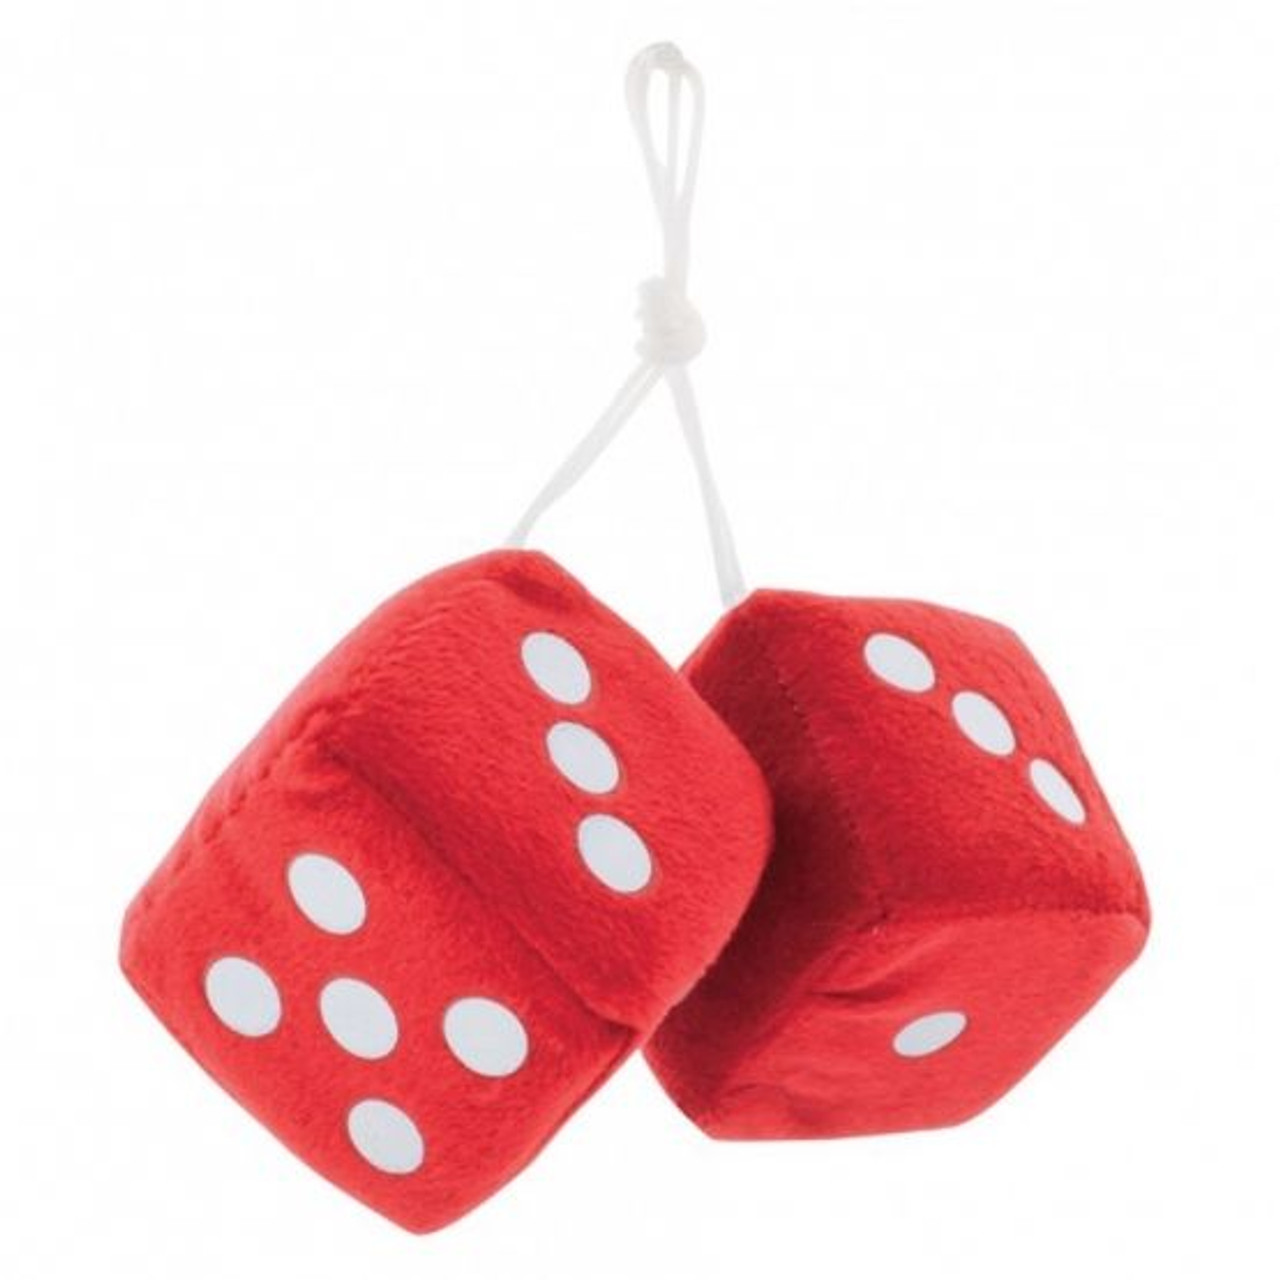 United Pacific  3" X 3" Classic Fuzzy Dice, Red (Pair)